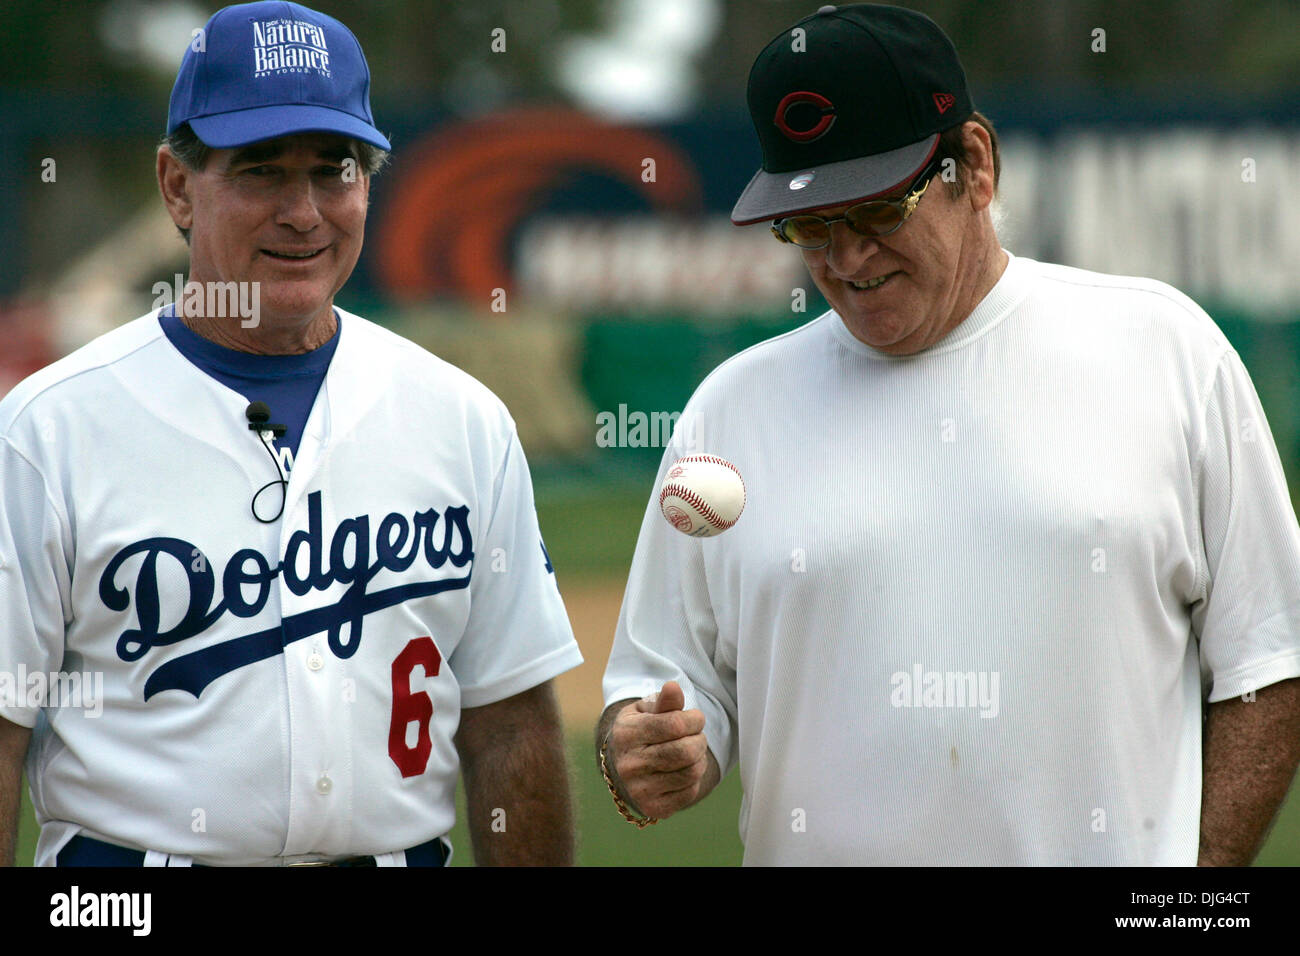 Steve garvey hi-res stock photography and images - Alamy